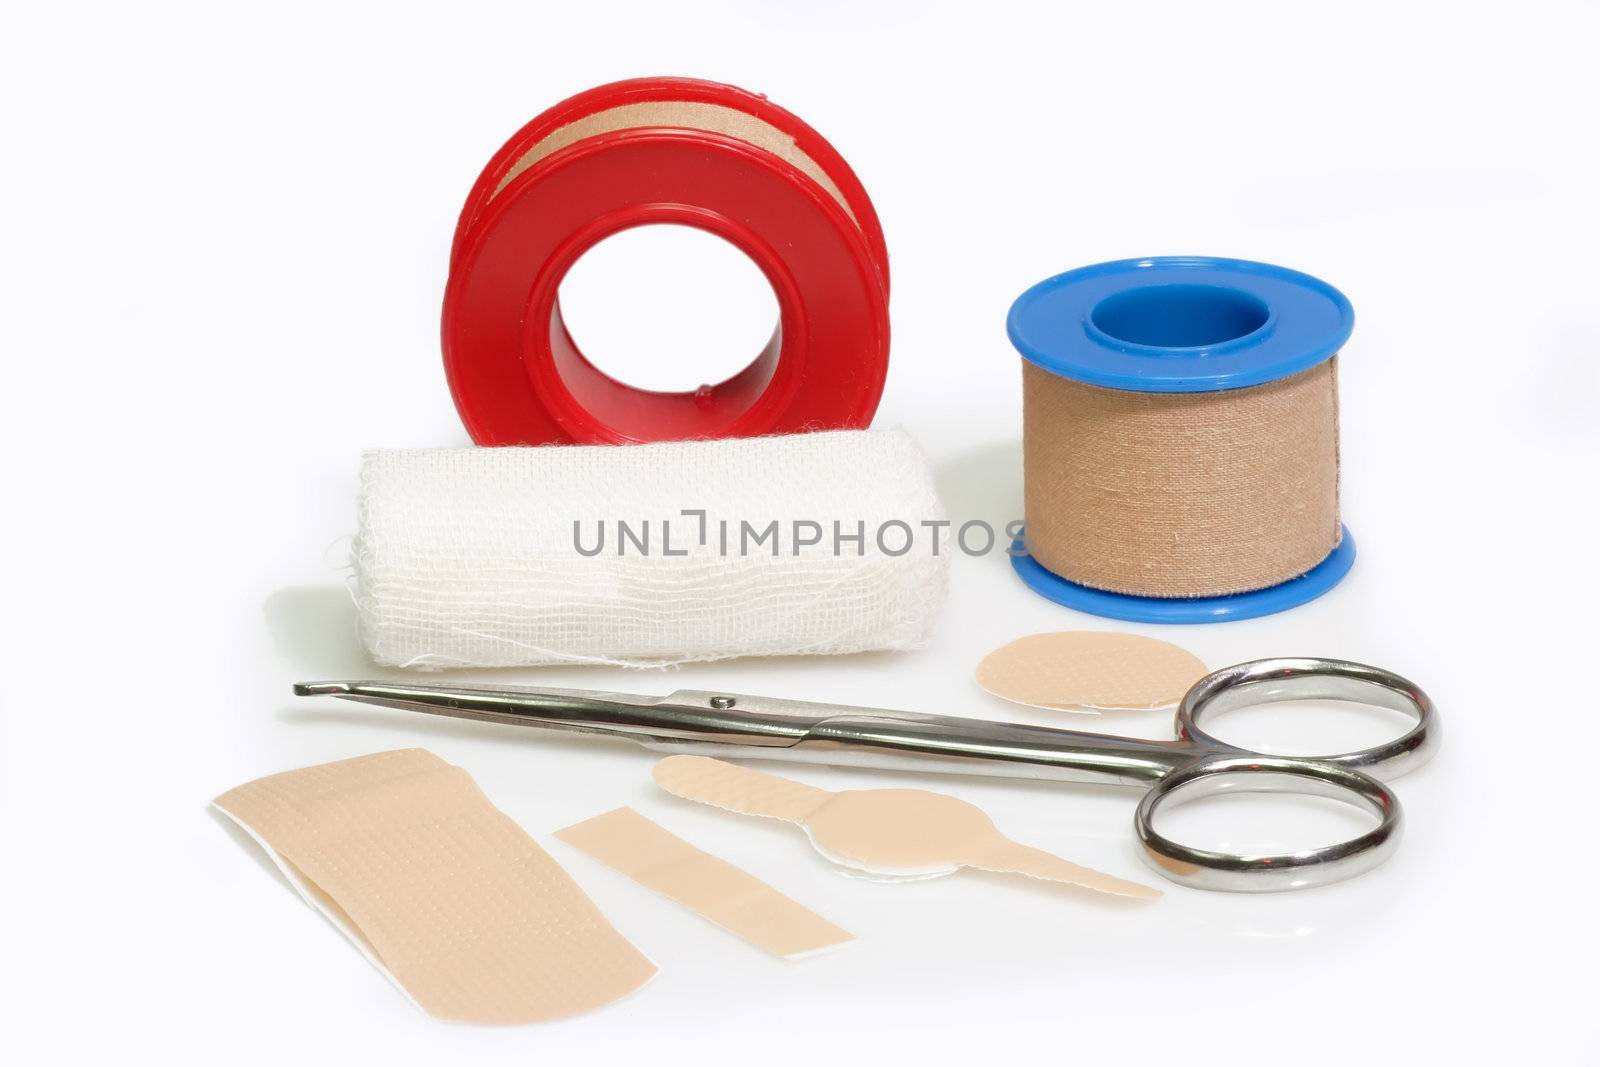 First aid kit and bandageon a bright background.